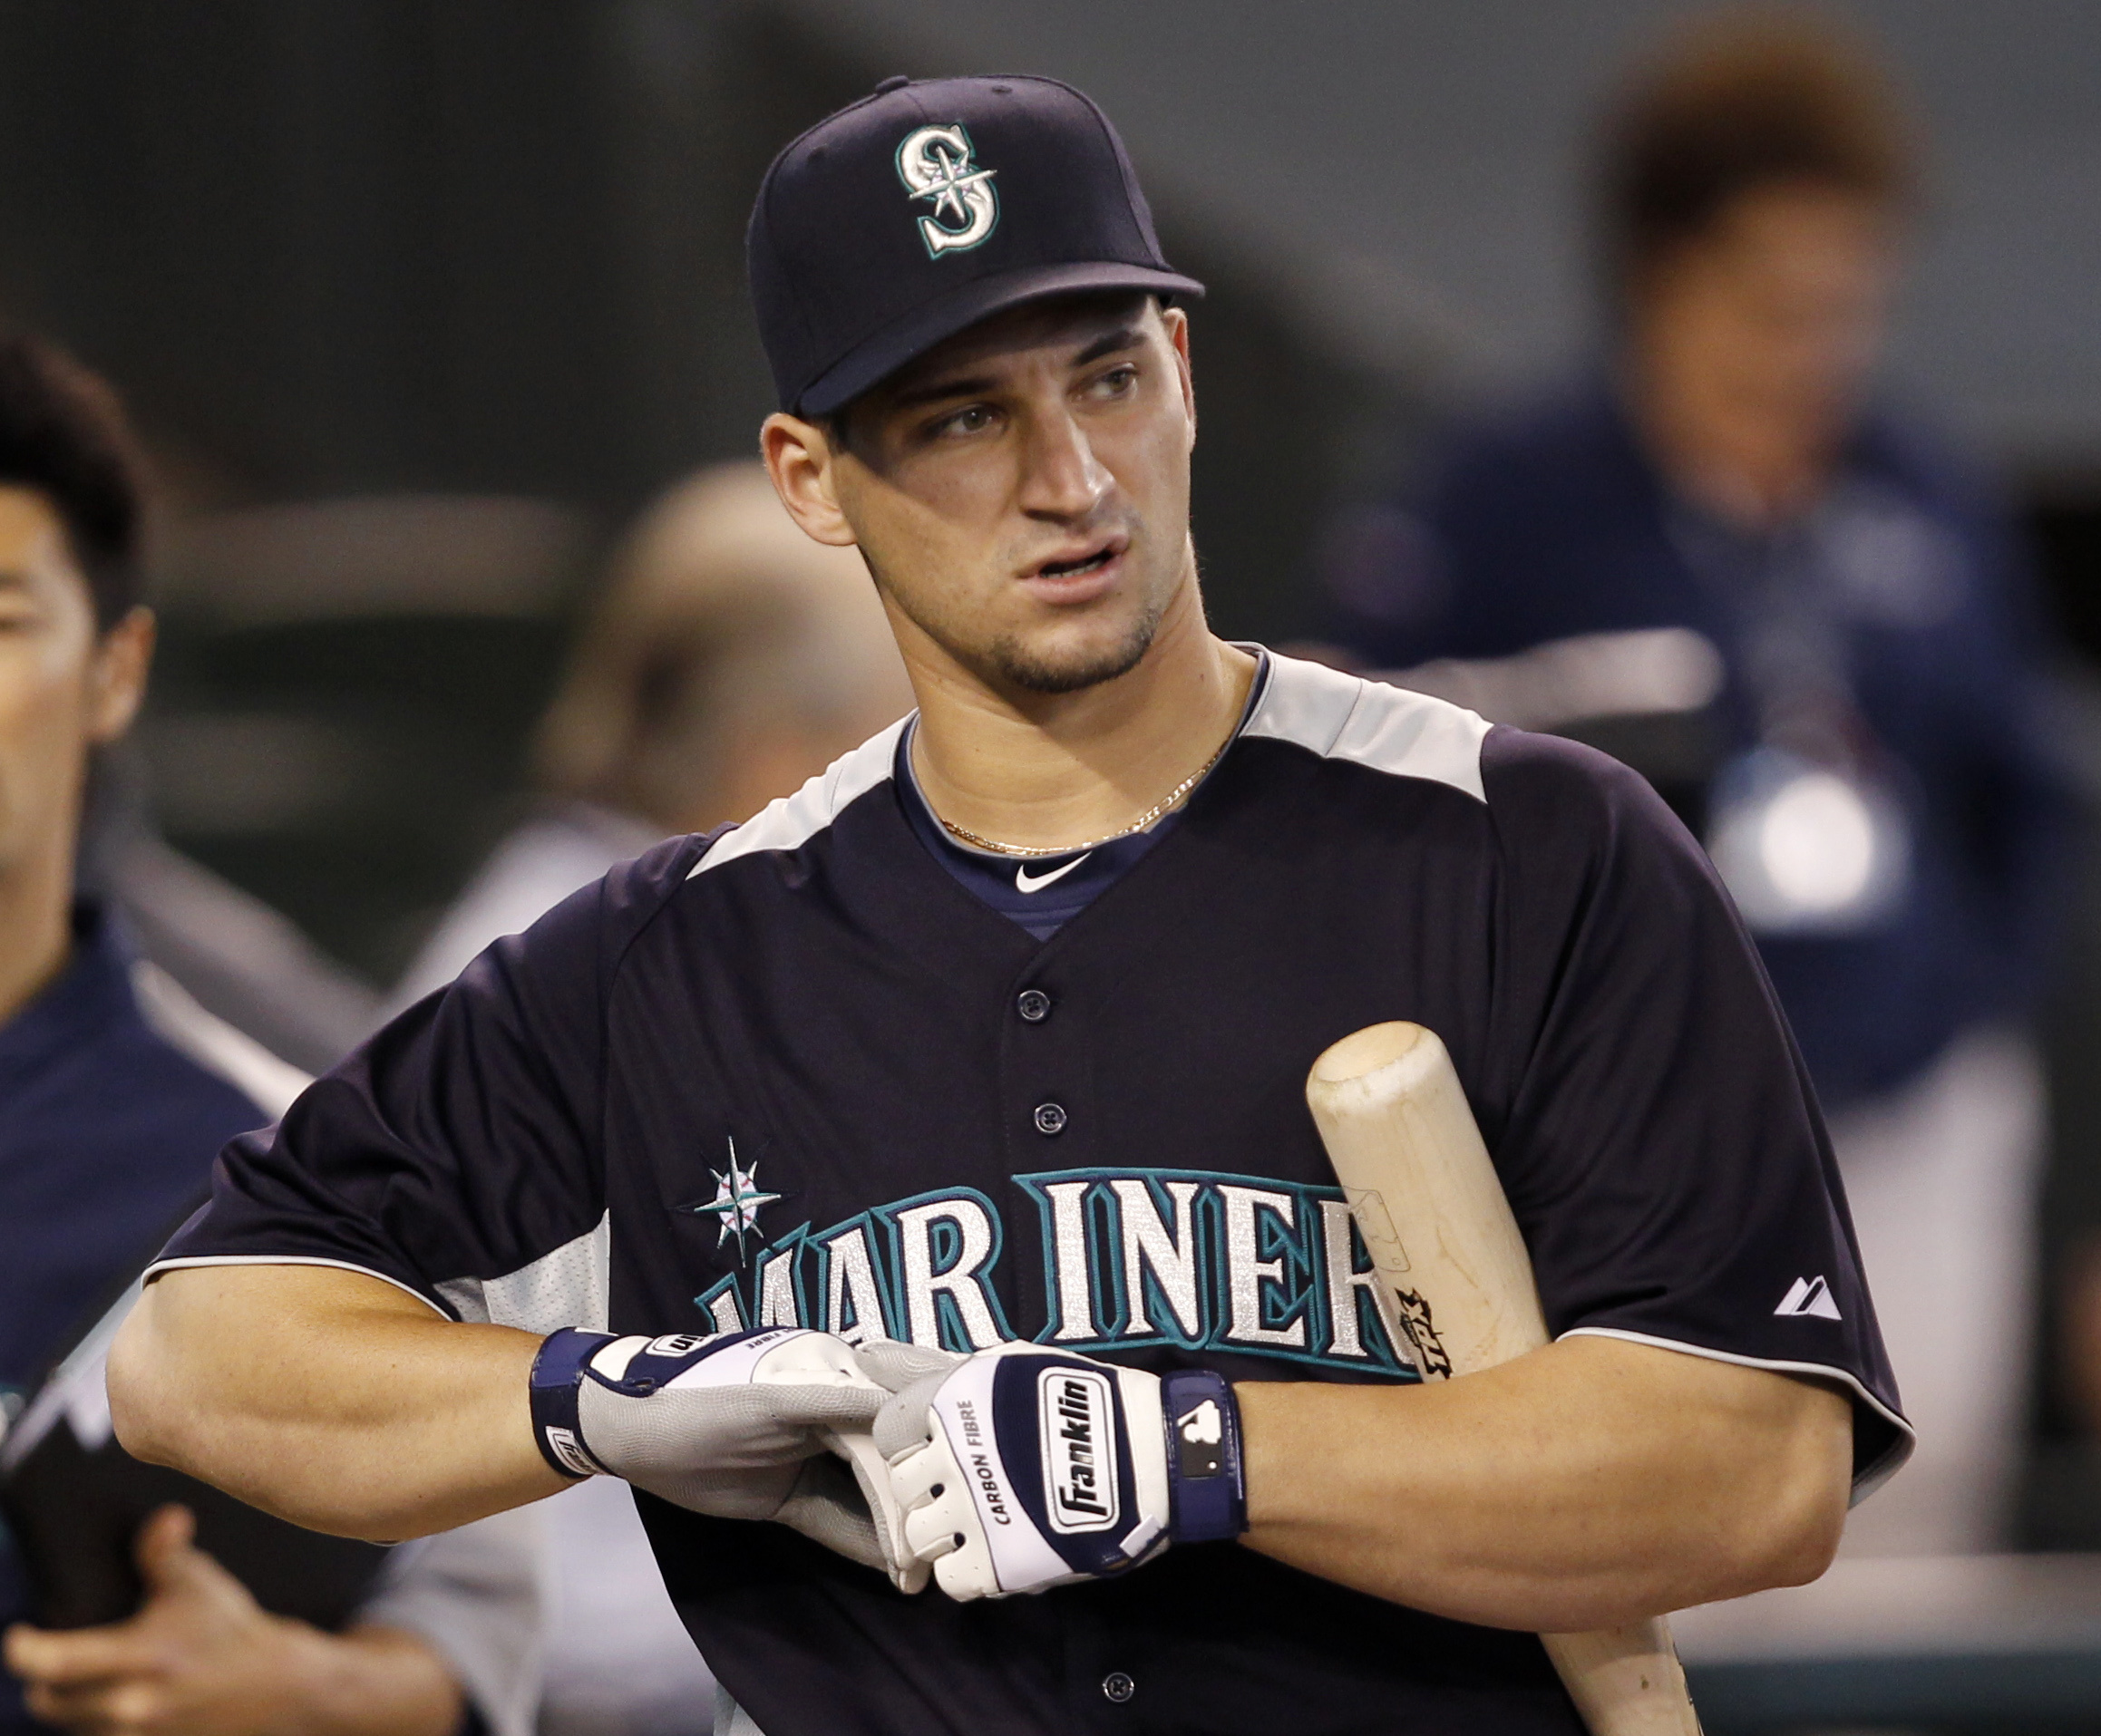 Mike Zunino has done well with the Rays, but cool it with the usual  narrative that surrounds ex-Mariners